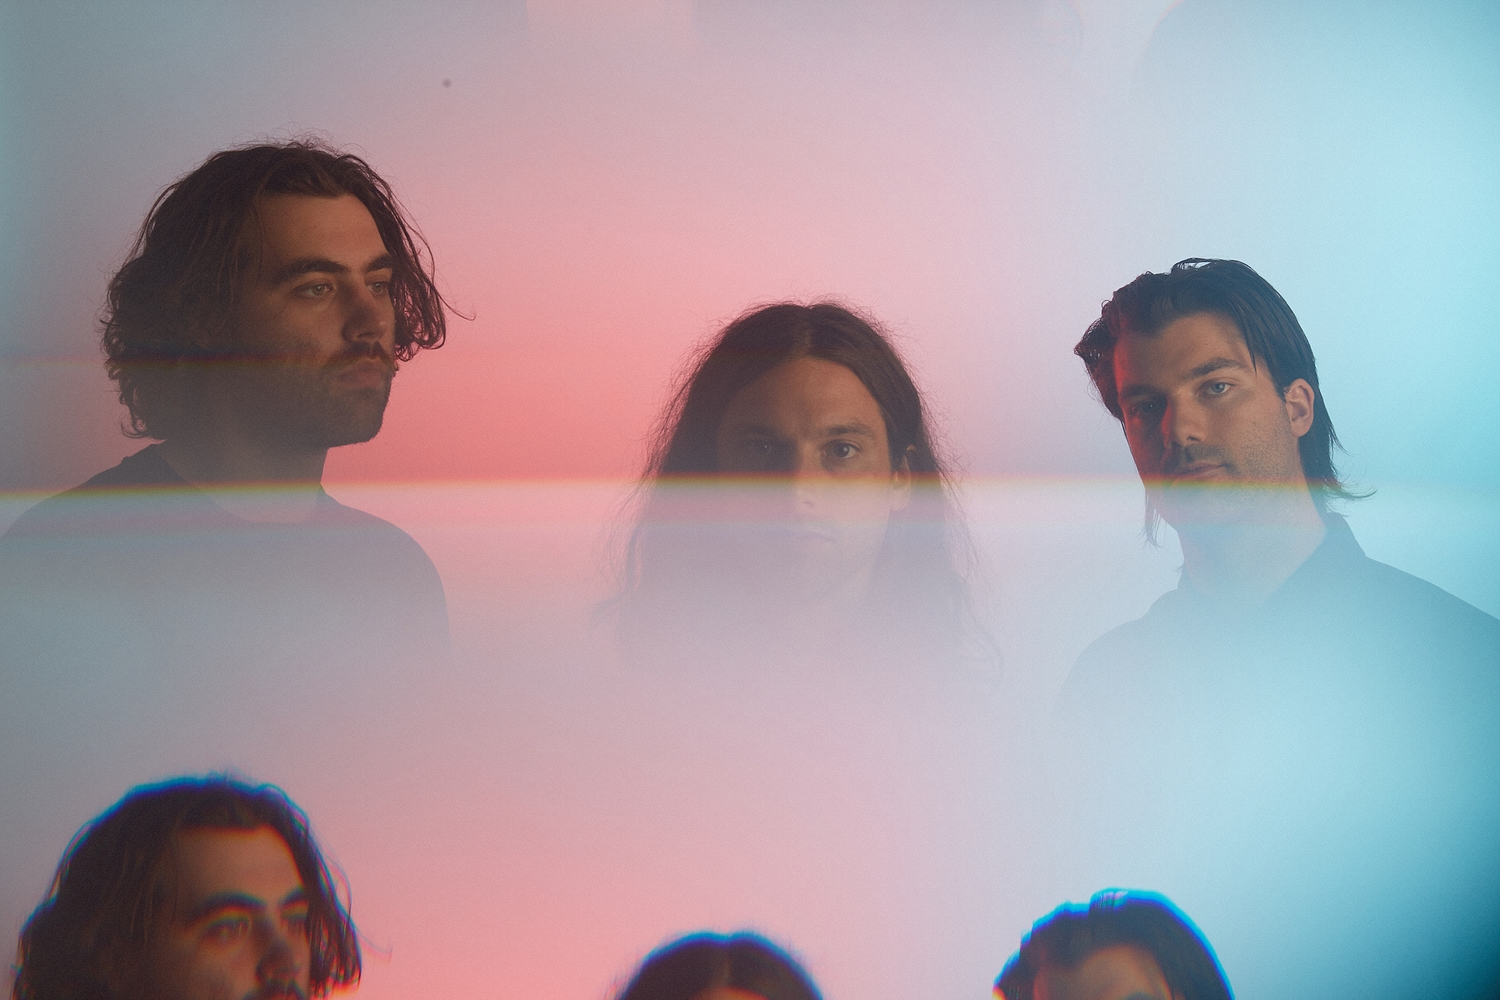 Turnover announce new album ‘Altogether’, share two new songs ‘Plant Sugar’ and ‘Much After Feeling’